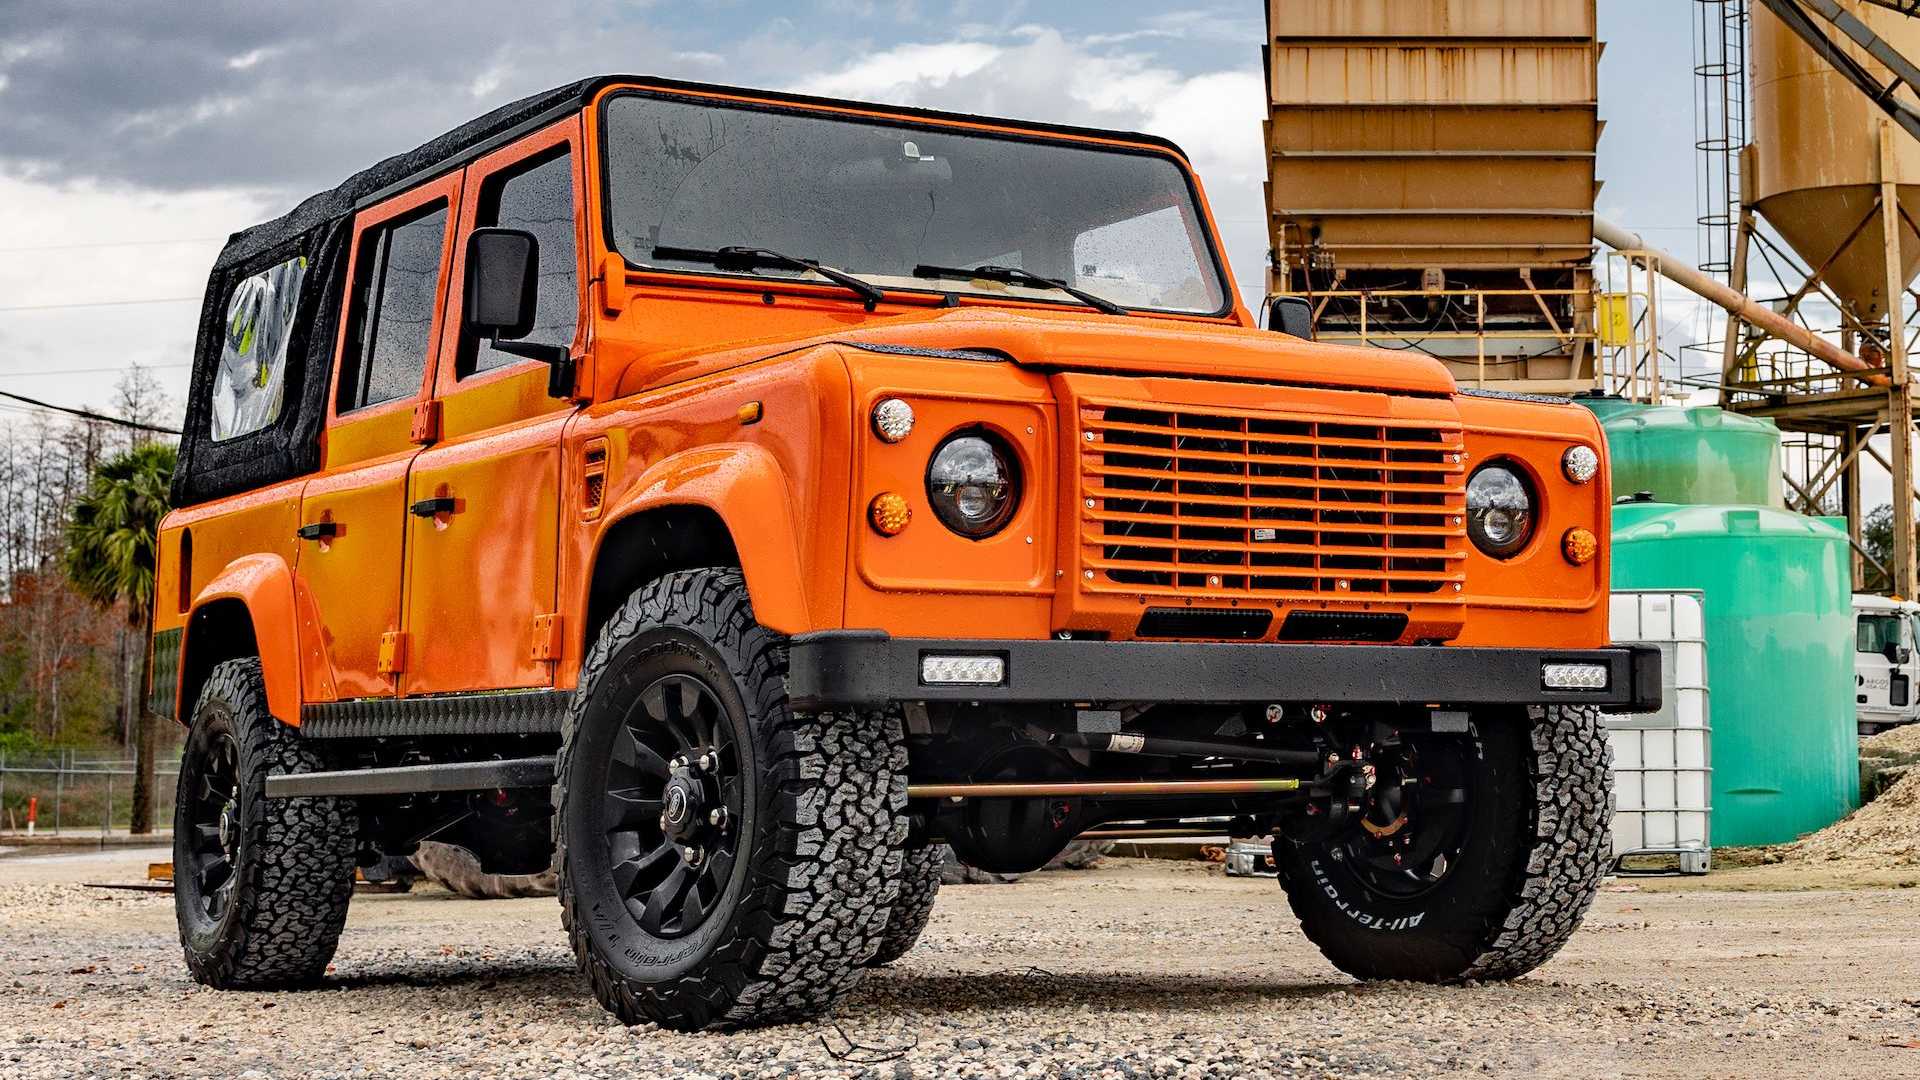 Orange You Glad ECD Restored This Fiery Classic Land Rover Defender?